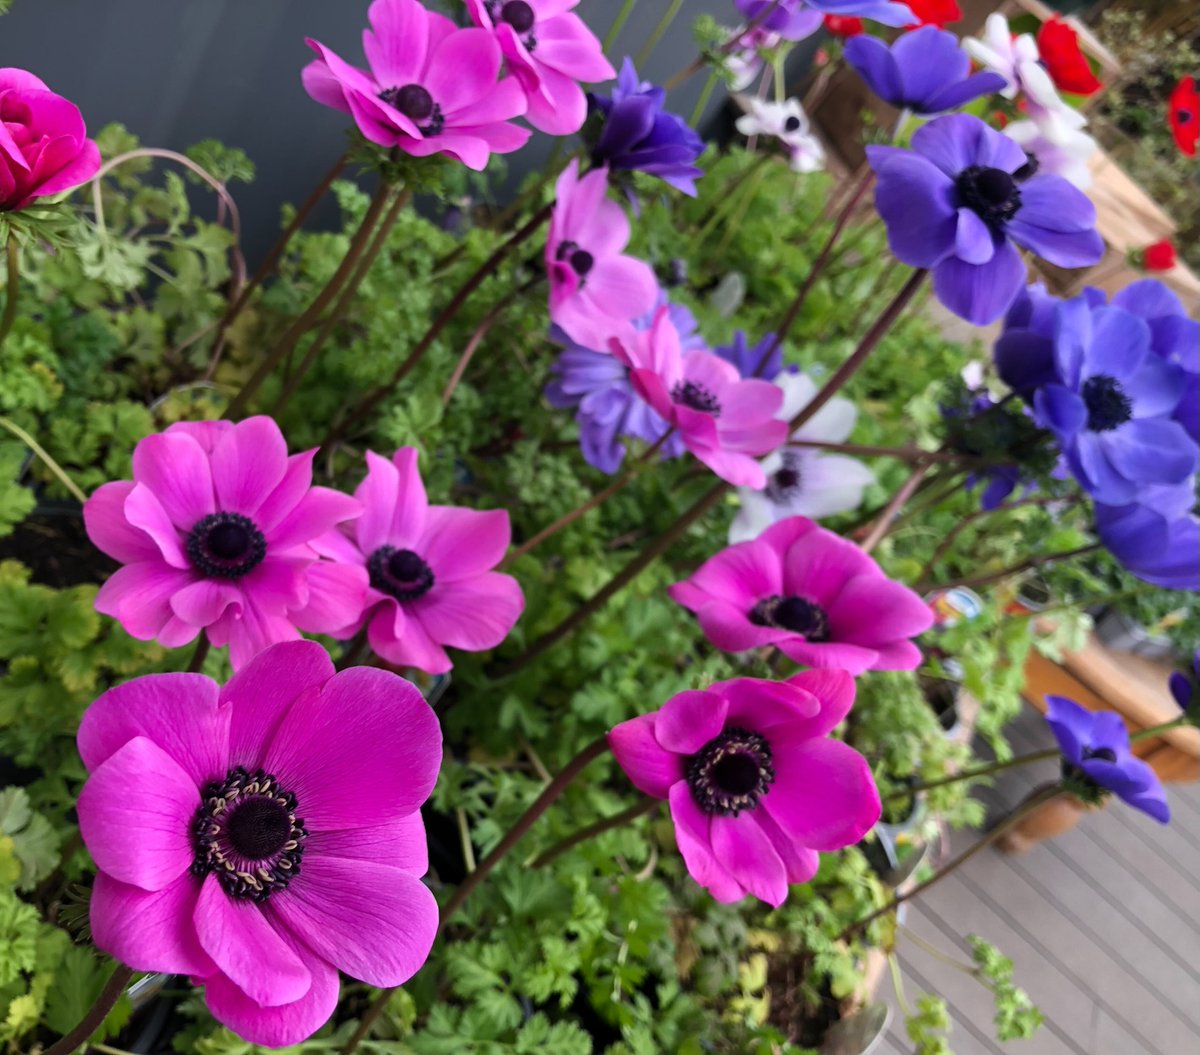 Our garden centre is now full of Spring colour - we have had fresh new deliveries of perennials, shrubs, climbers, pond plants and lots of cheerful bedding! The gardening season is now well and truly open and ready for an exciting new year -)